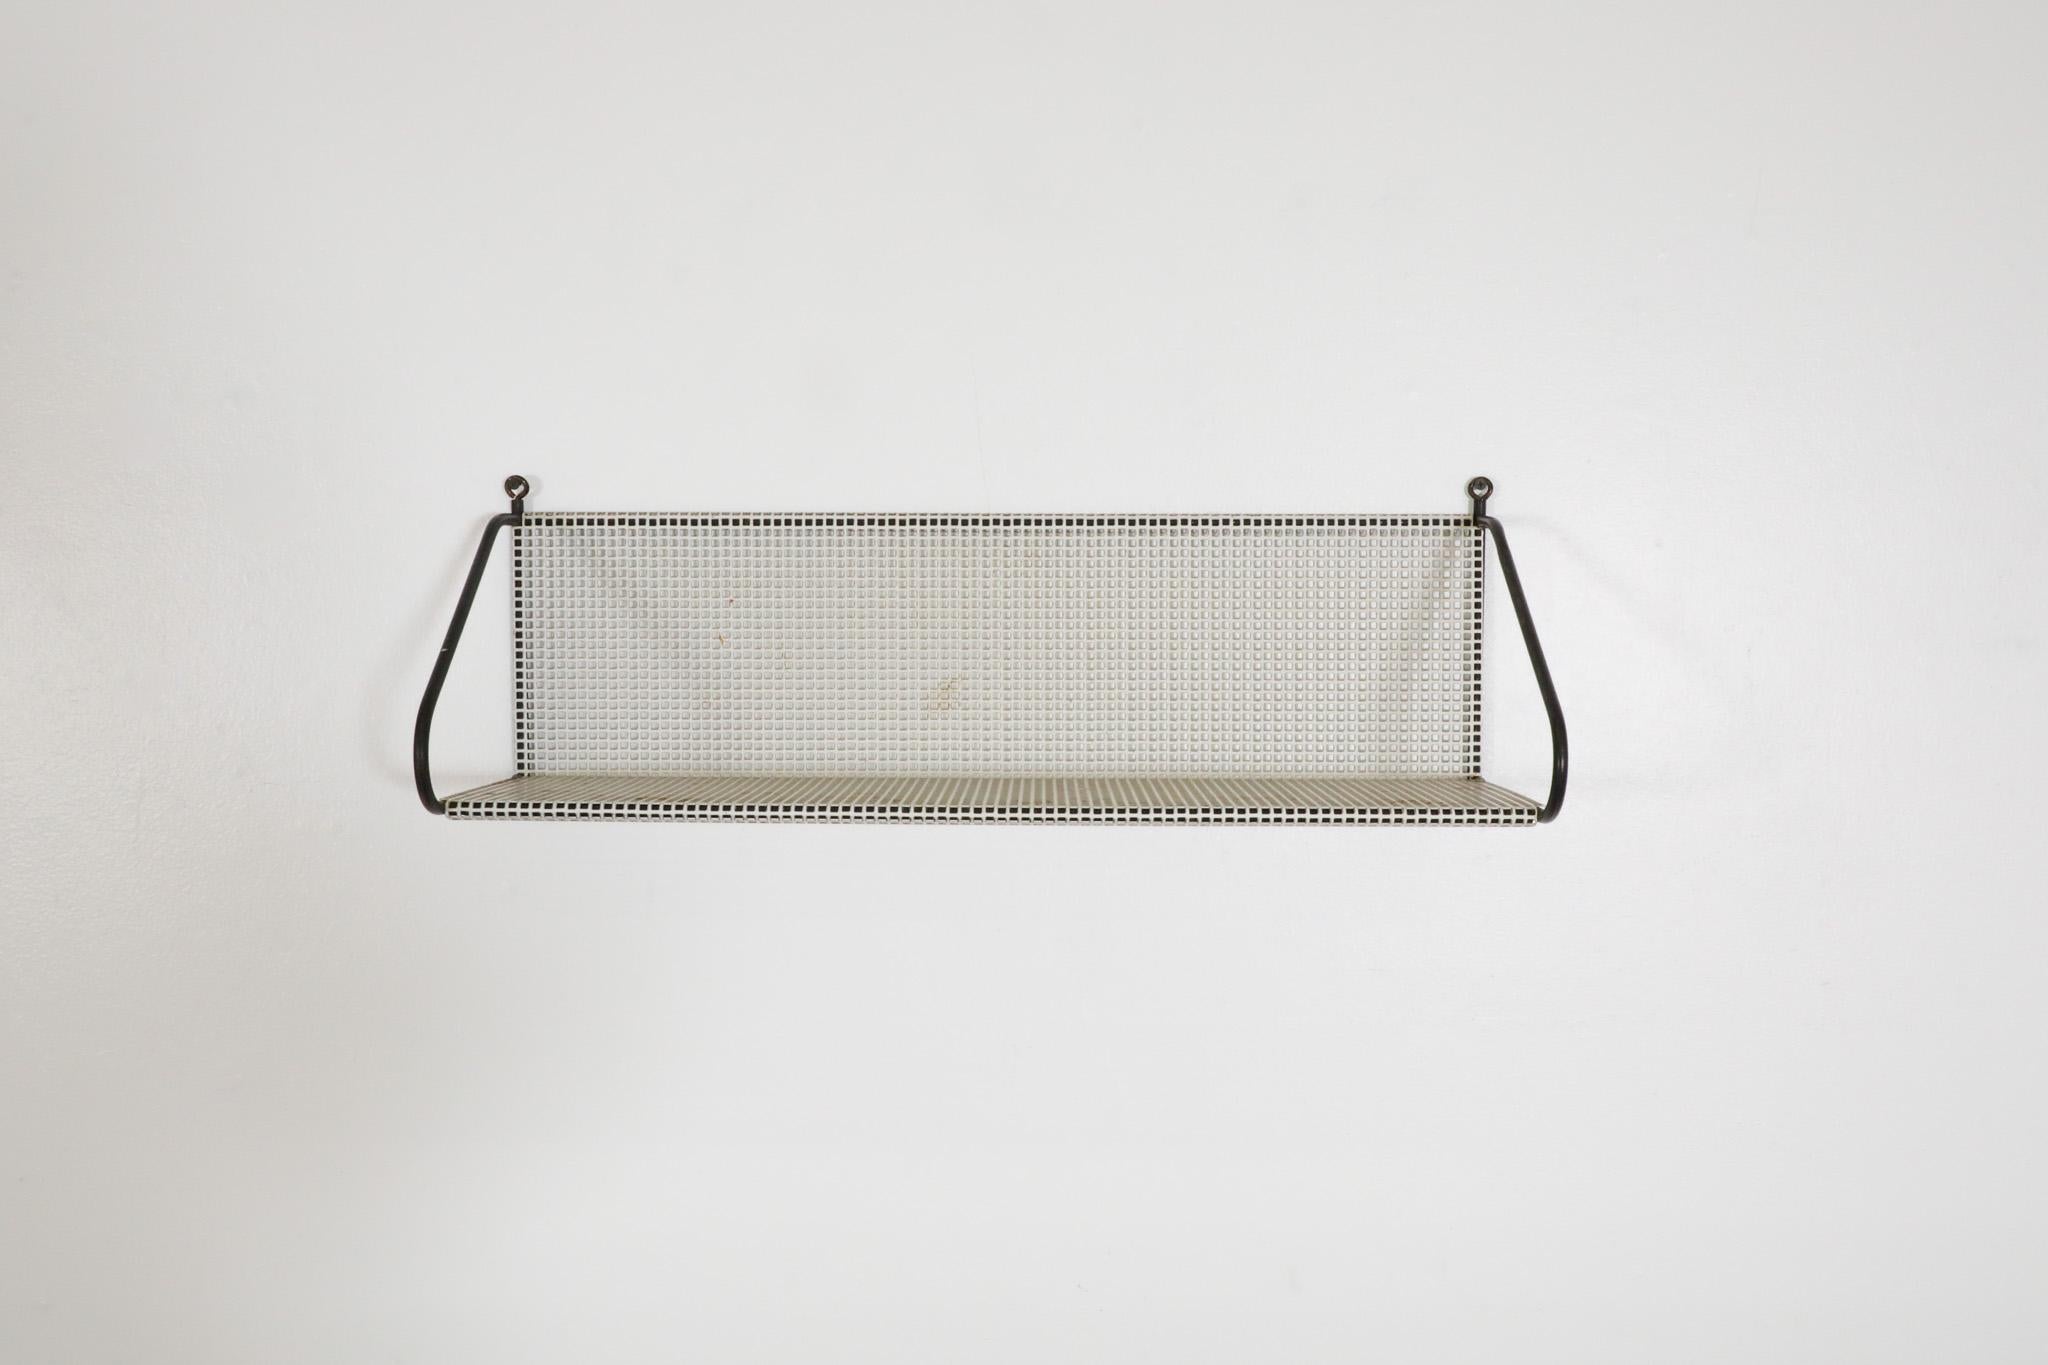 Mid-Century, Mathieu Mategot inspired, white perforated industrial wall mount shelf with contrasting black wire frame by Pilastro. Dutch designed, designer was most likely Floris Diedeldij who's very much acclaimed in his own right.  The shelf is in